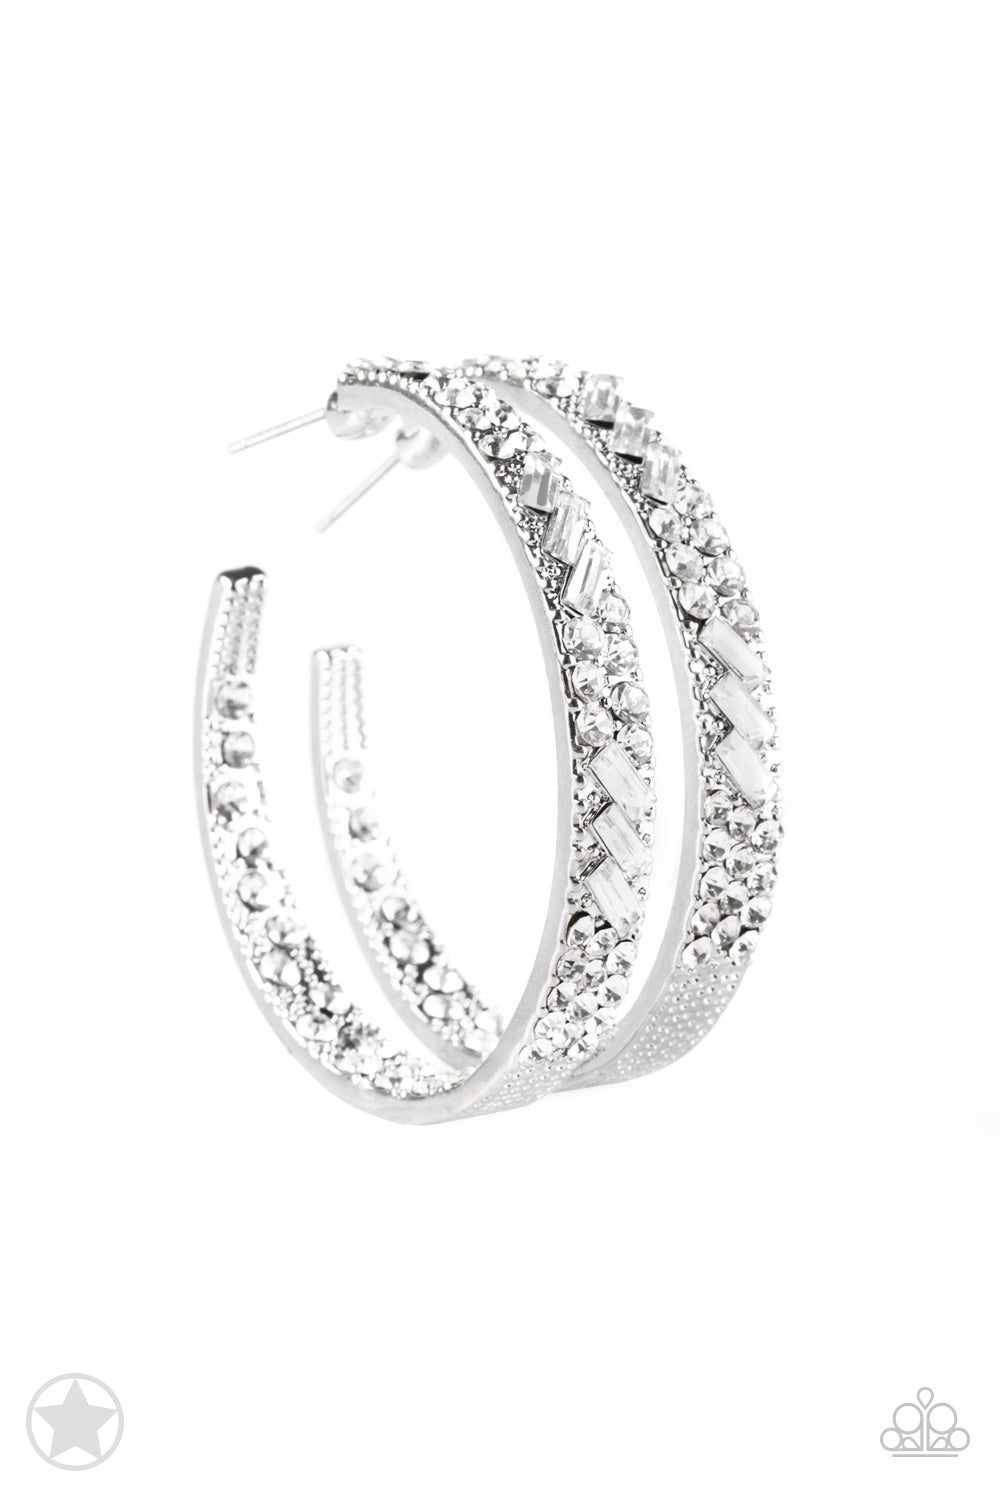 The front facing surface of a chunky silver hoop is dipped in brilliantly sparkling rhinestones while light-catching texture wraps around the back. The interior of the hoop features the opposite pattern, creating the illusion of a full hoop of blinding rhinestones. Earring attaches to a standard post fitting. Hoop measures 1 3/4" in diameter.